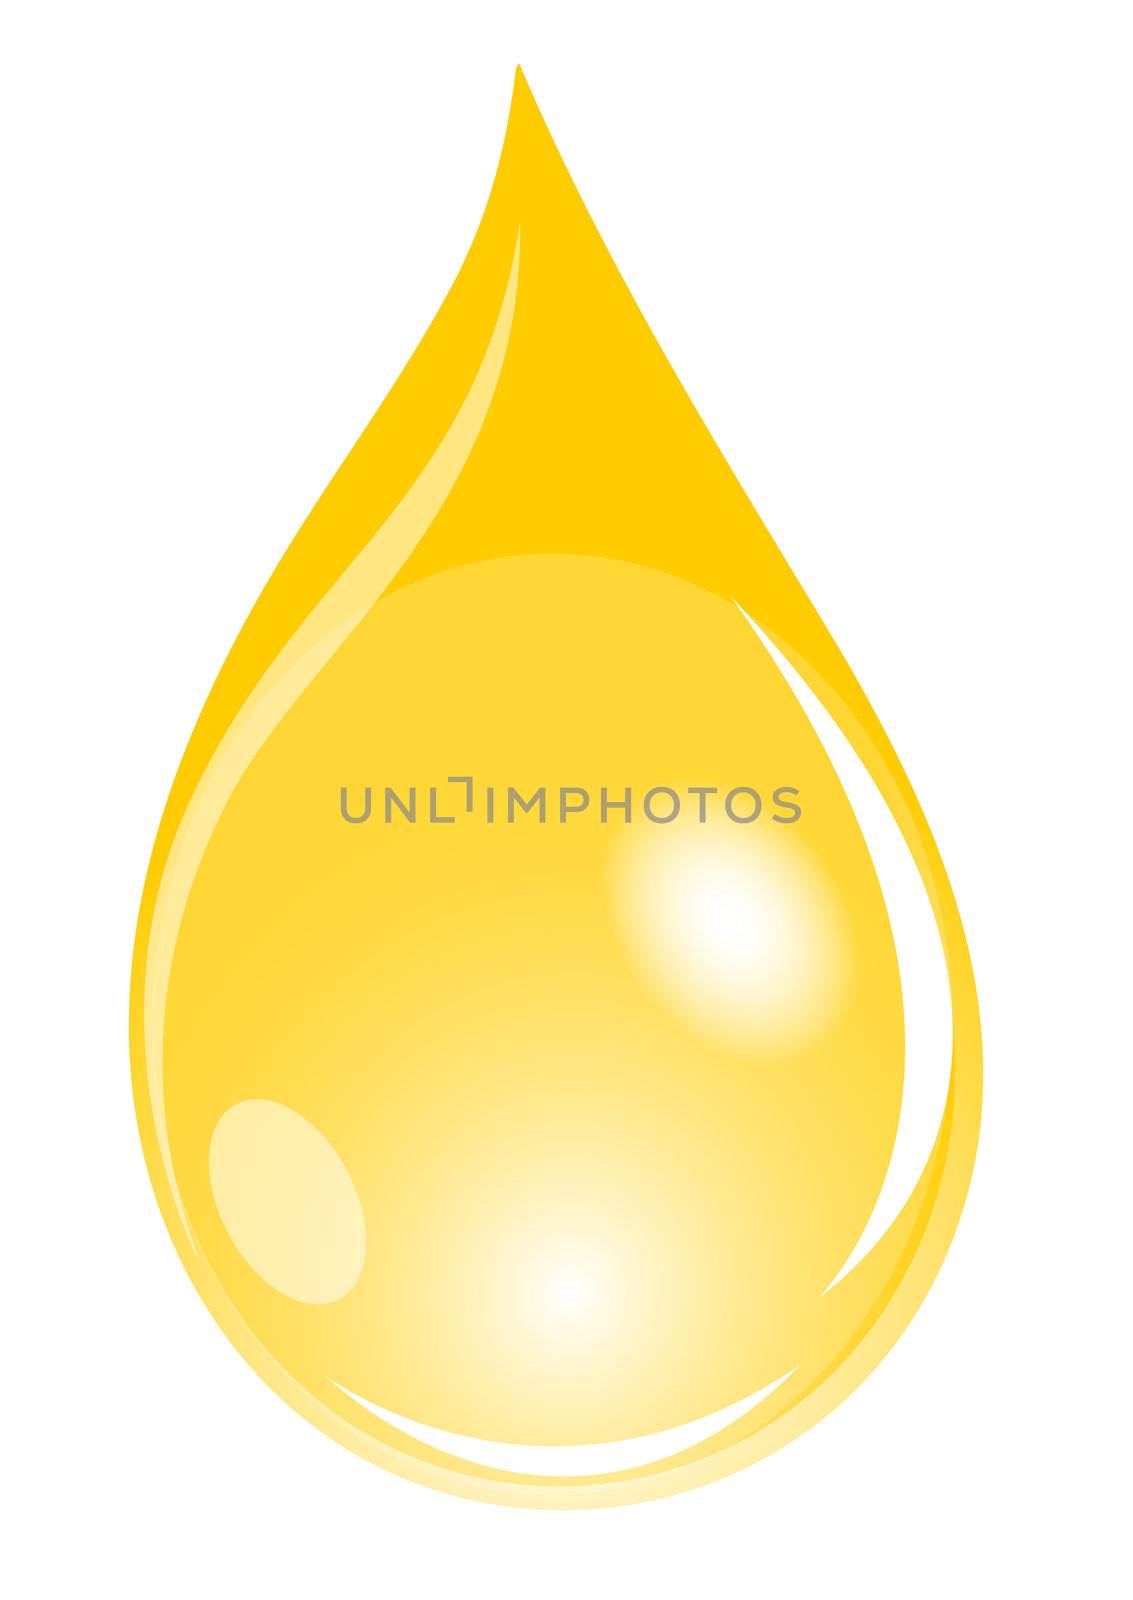 Illustration of a golden waterdrop by peromarketing